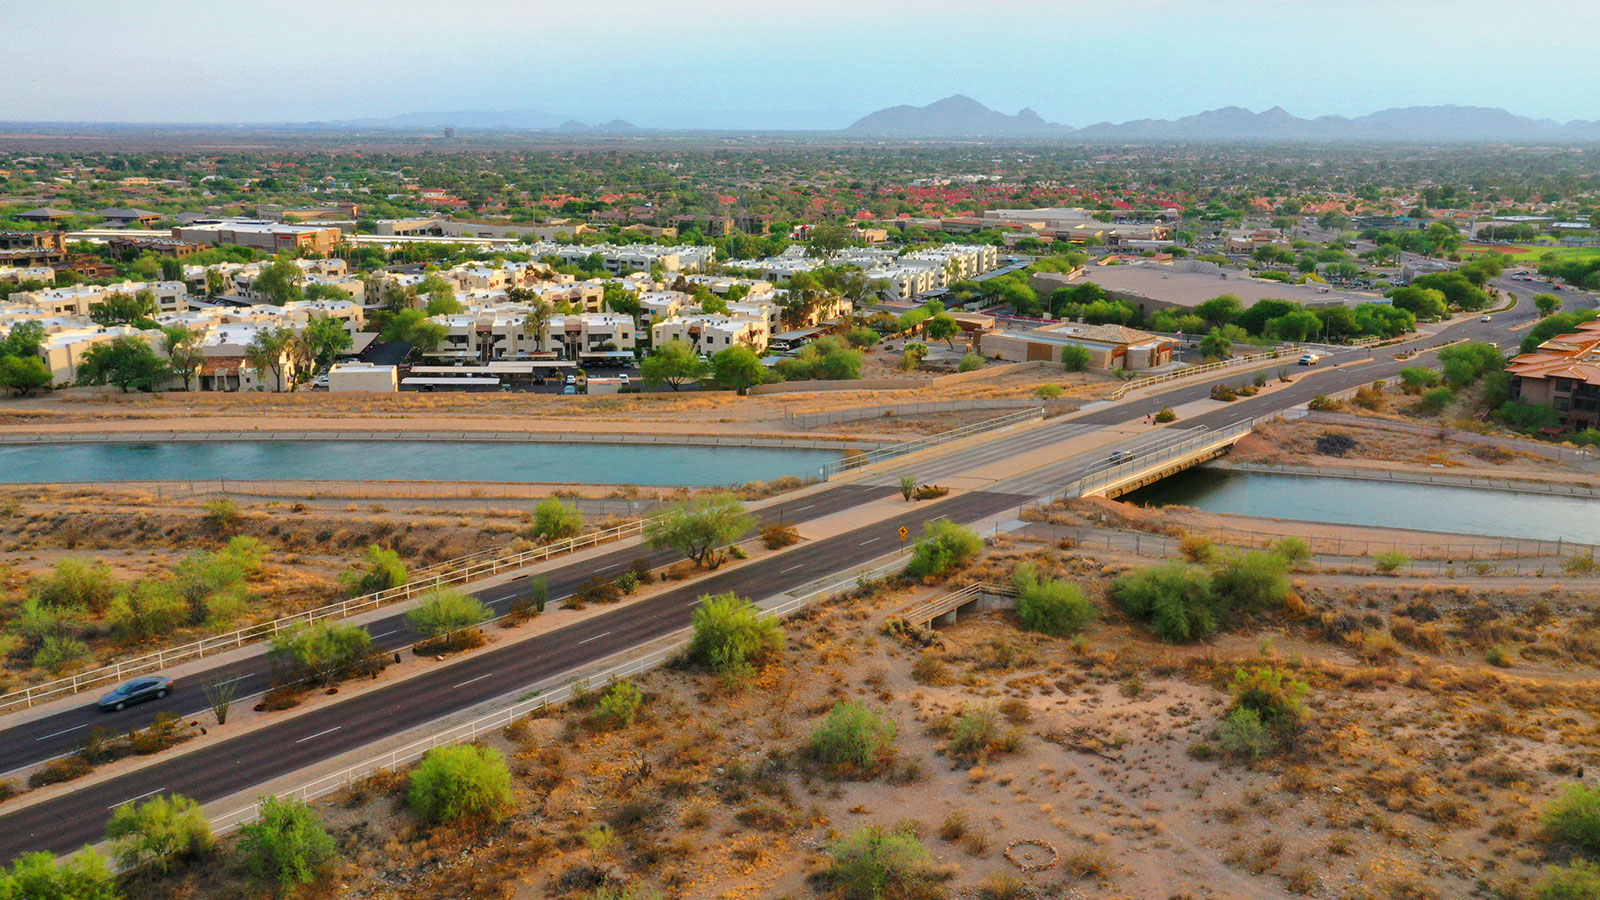 Scottsdale, Arizona highway across a river with buildings, greenery and mountains in the distance